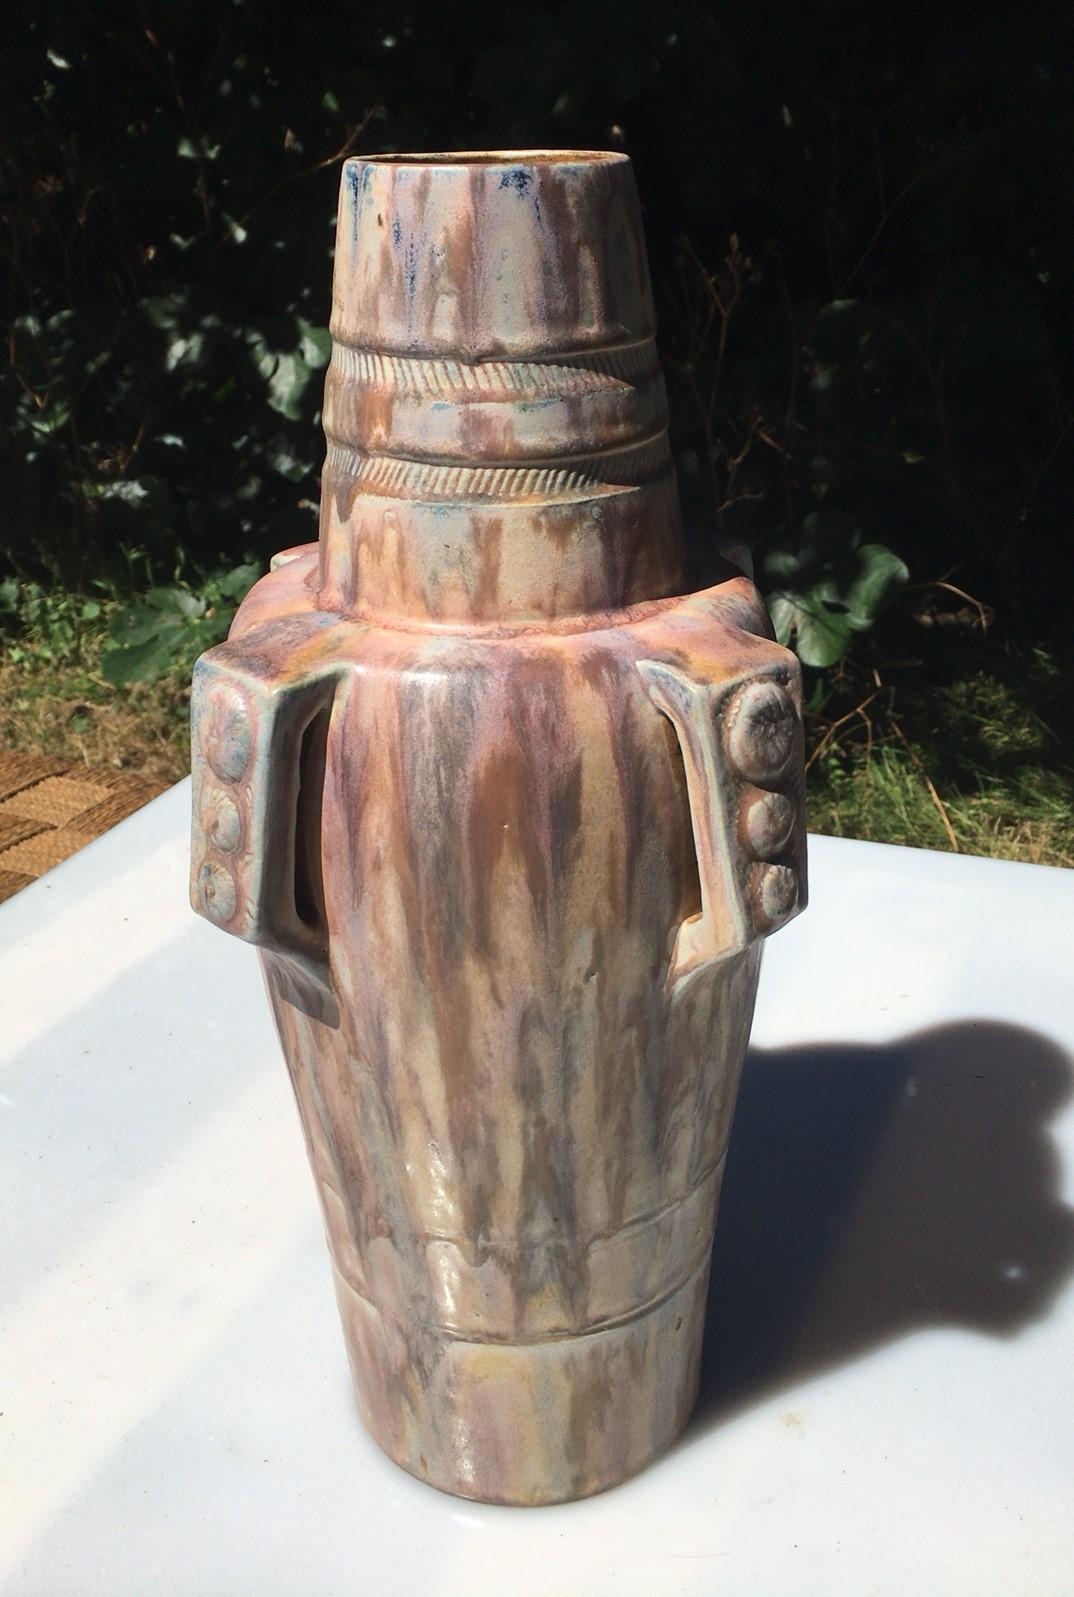 Tall Art Deco pottery vase Charles Greber, circa 1930
Primitive style with handles.